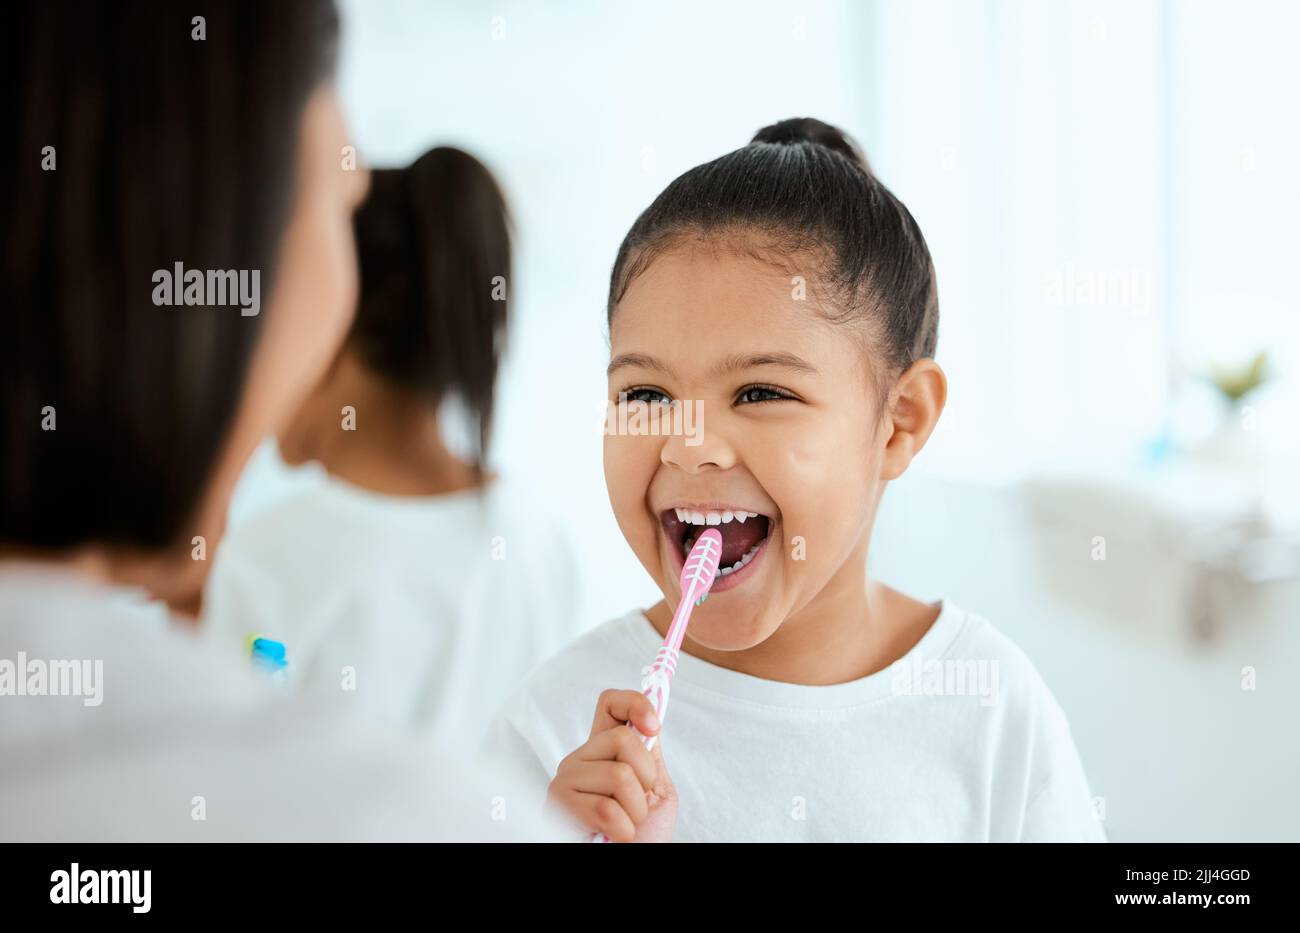 Brush your tongue too. an adorable little girl brushing her teeth while her mother helps her at home. Stock Photo